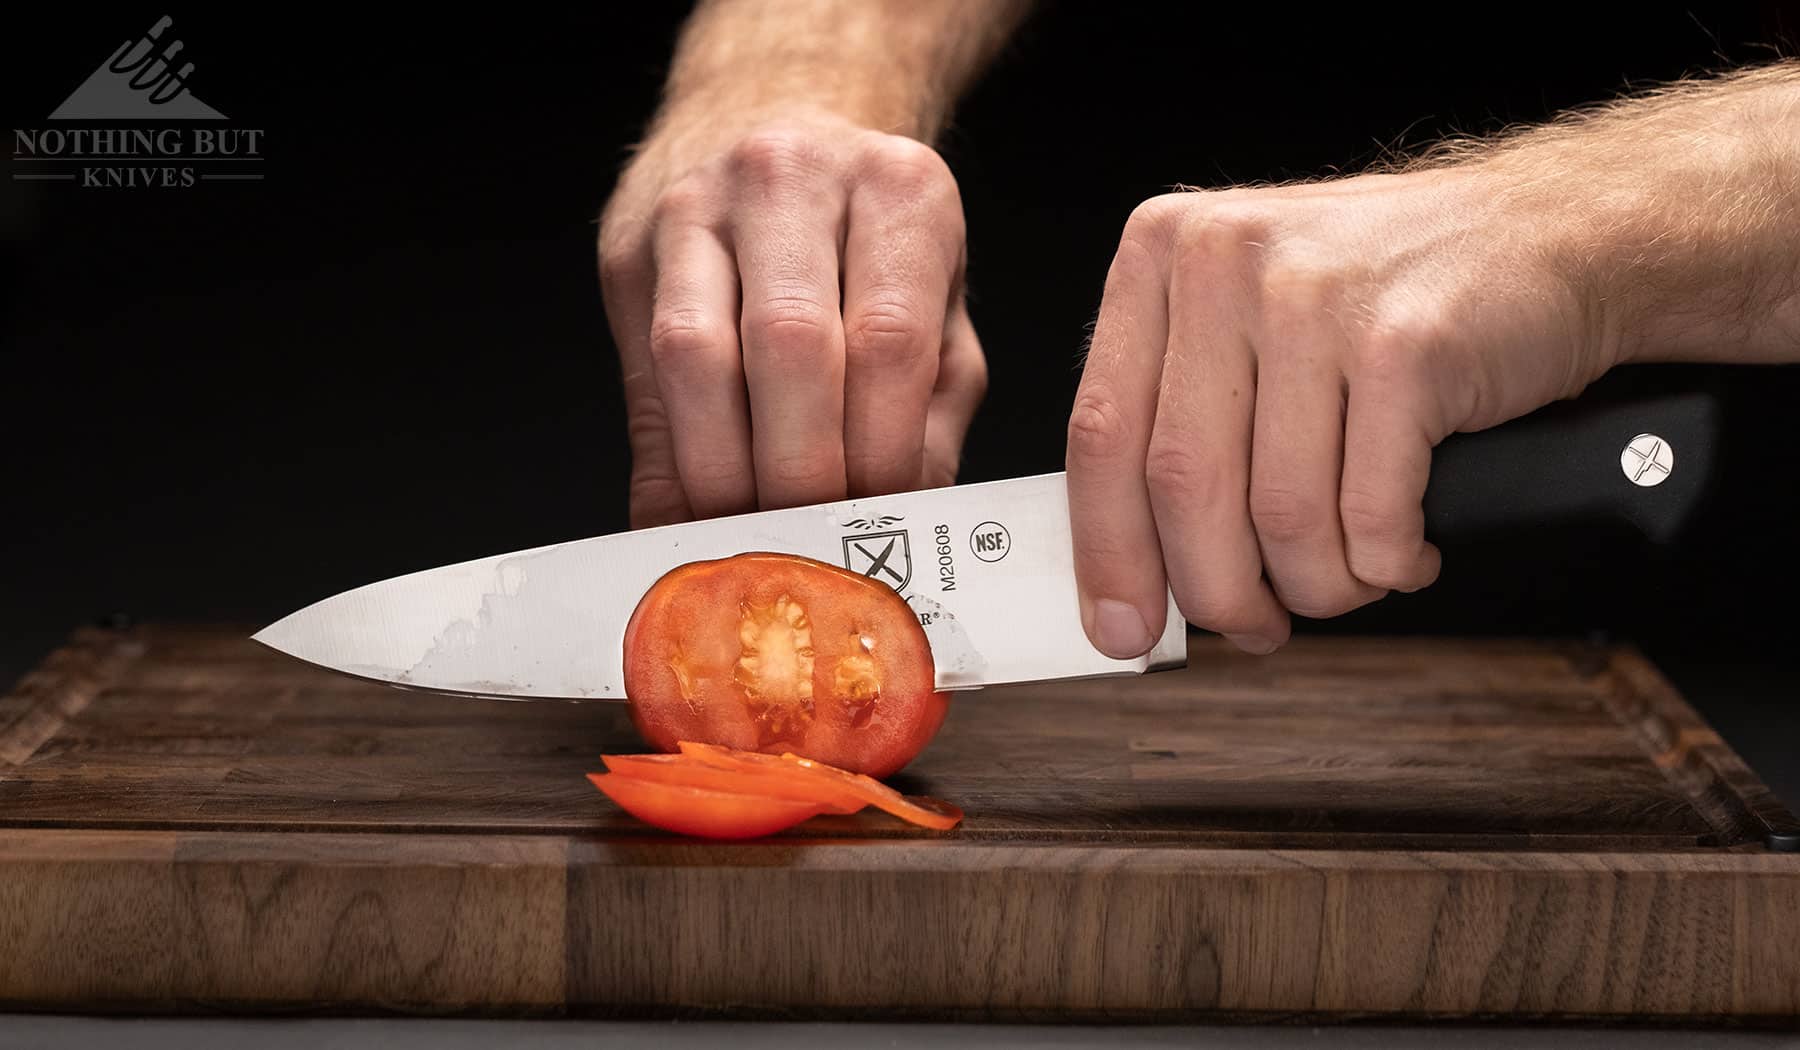 https://www.nothingbutknives.com/wp-content/uploads/2022/04/Slicing-A-Tomato-With-The-Mercer-Genesis-Chef-Knife.jpg